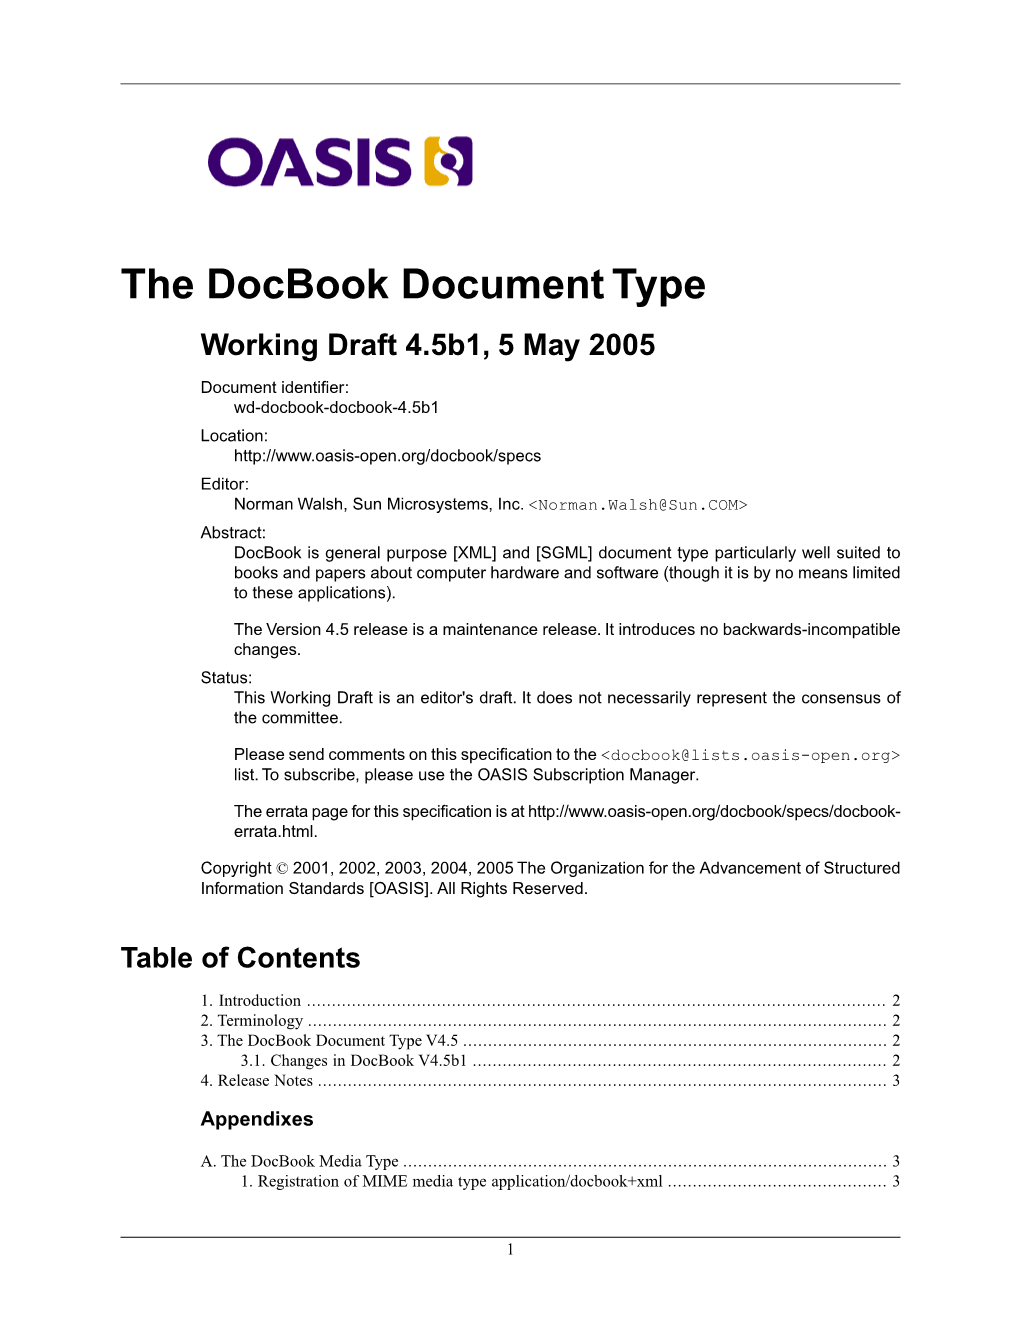 The Docbook Document Type Working Draft 4.5B1, 5 May 2005